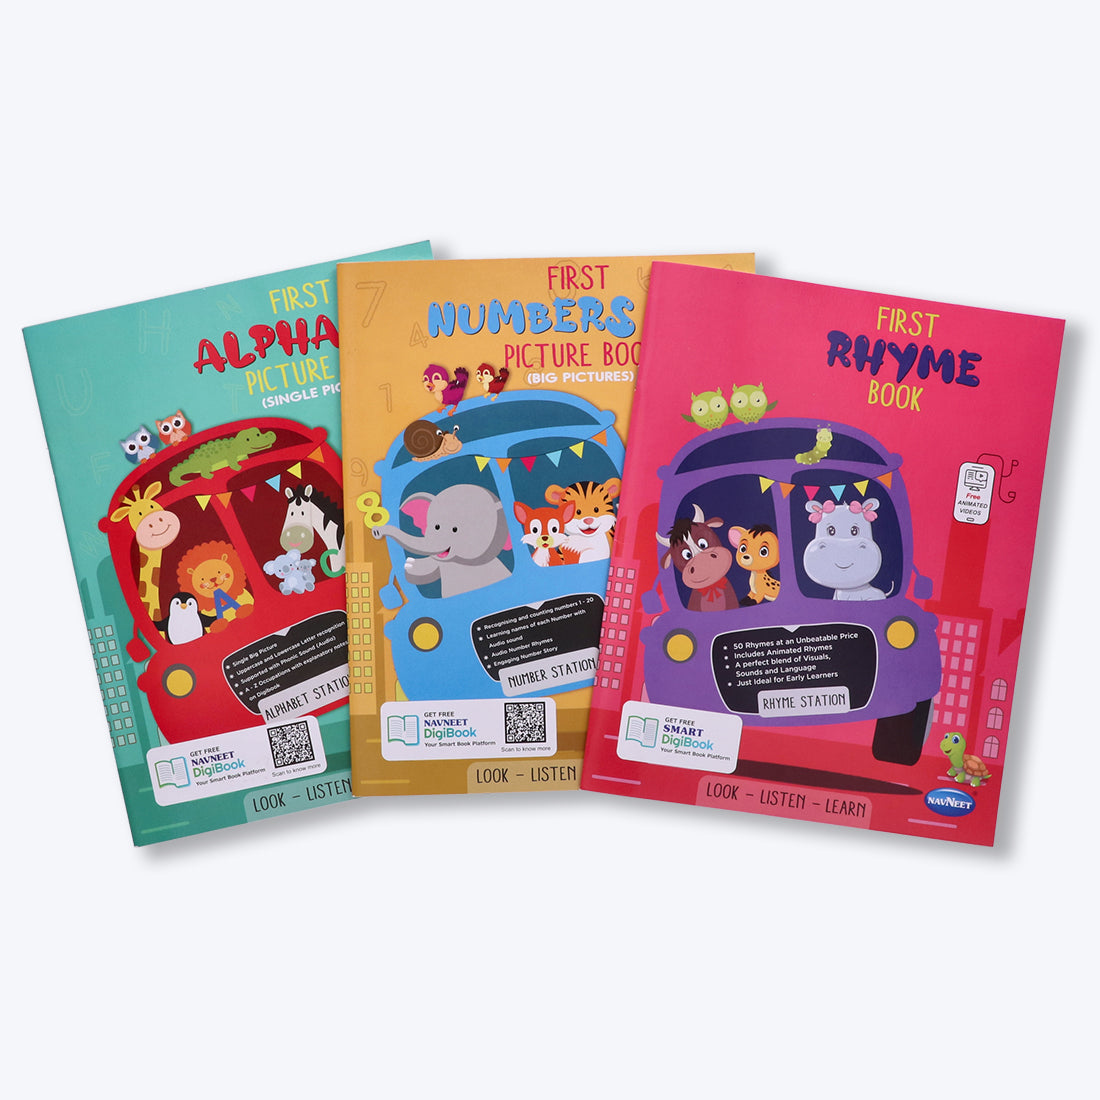 Navneet First Alphabet Picture Book, First Numbers 1-20 Picture Book and My First Rhyme Book-Bestselling Picture for Babies & Toddlers: Large Picture